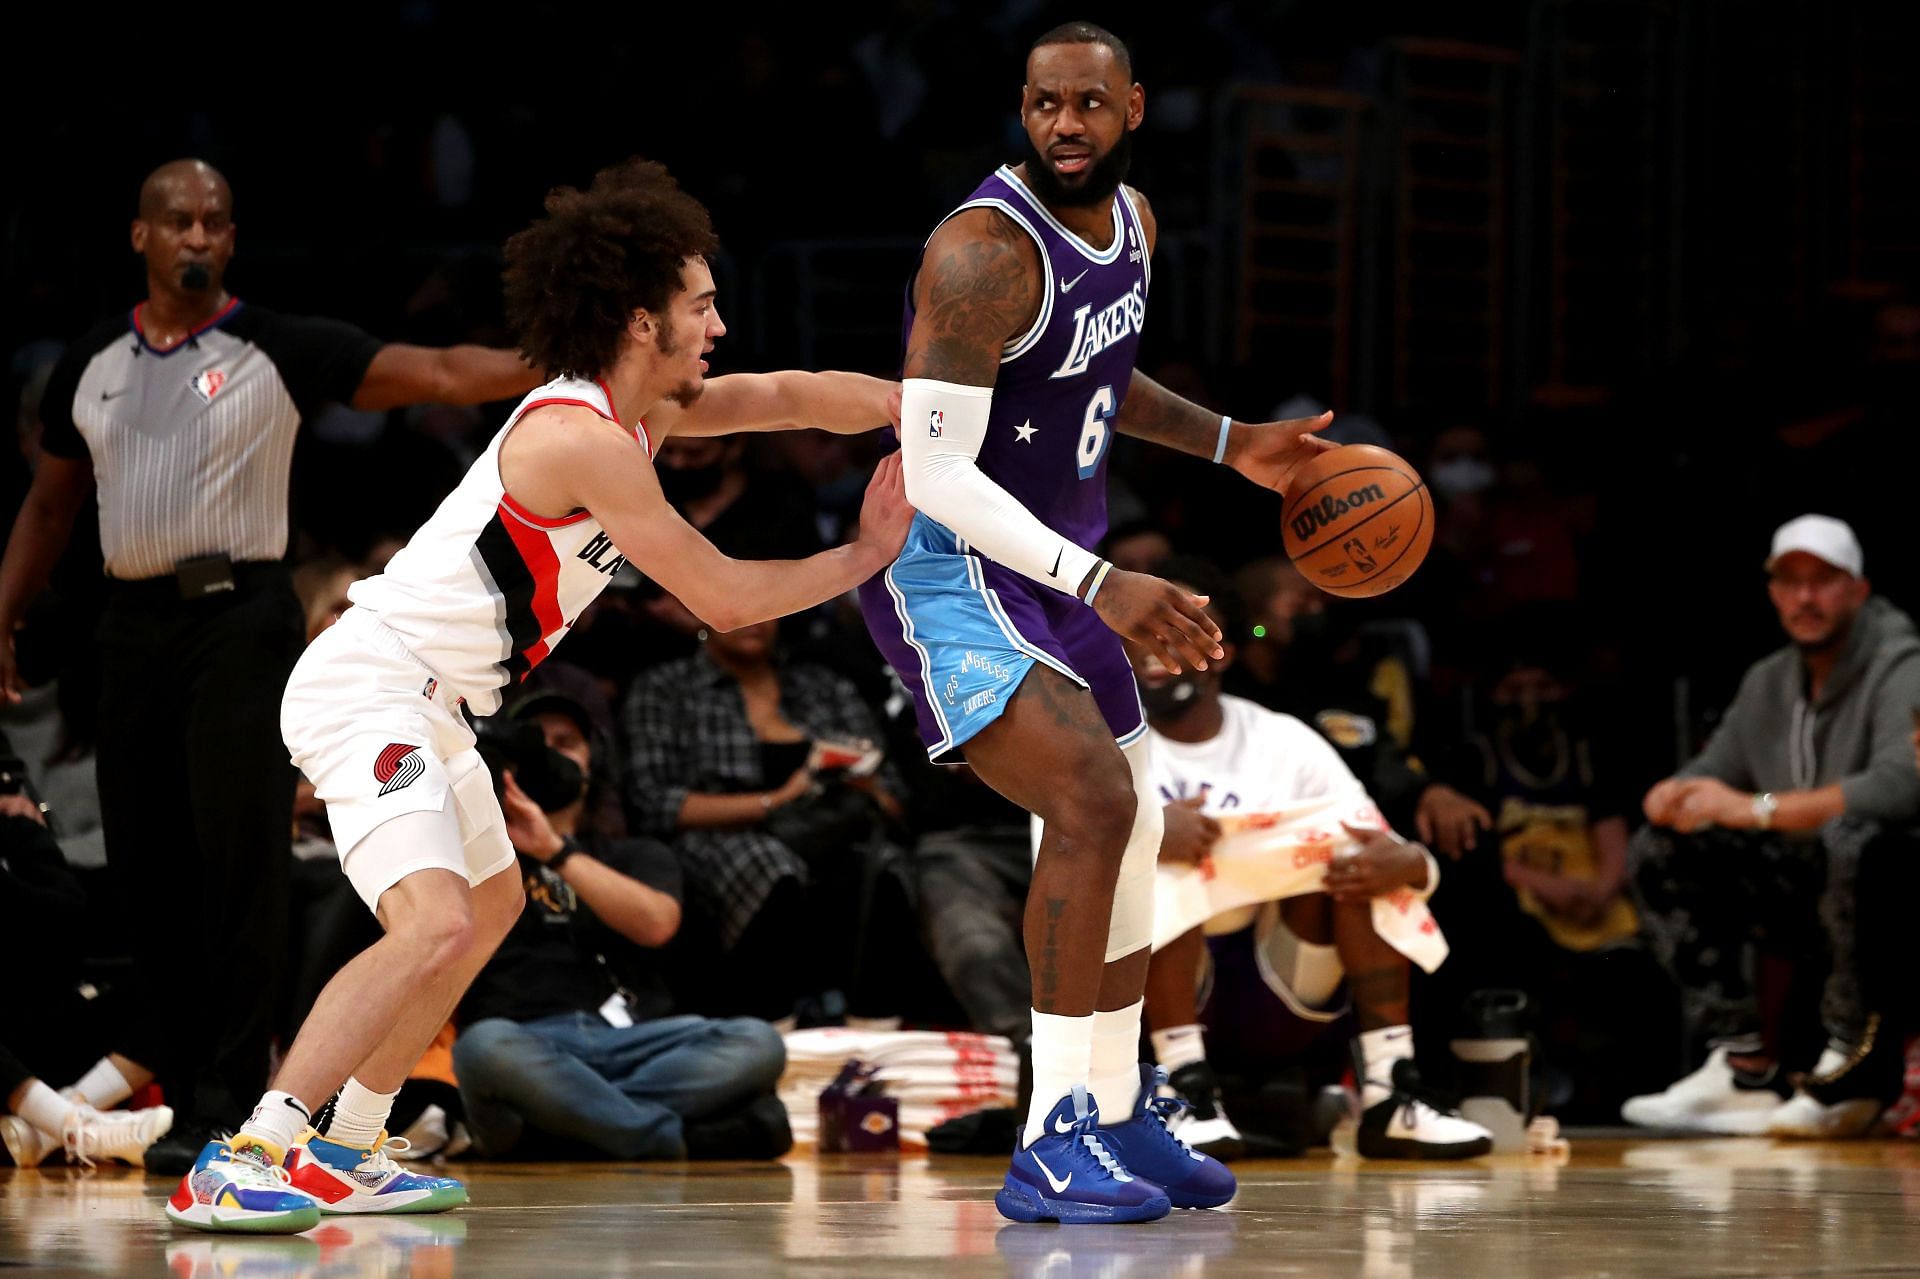 LeBron James of the LA Lakers handles the ball against CJ Elleby of the Portland Trail Blazers.